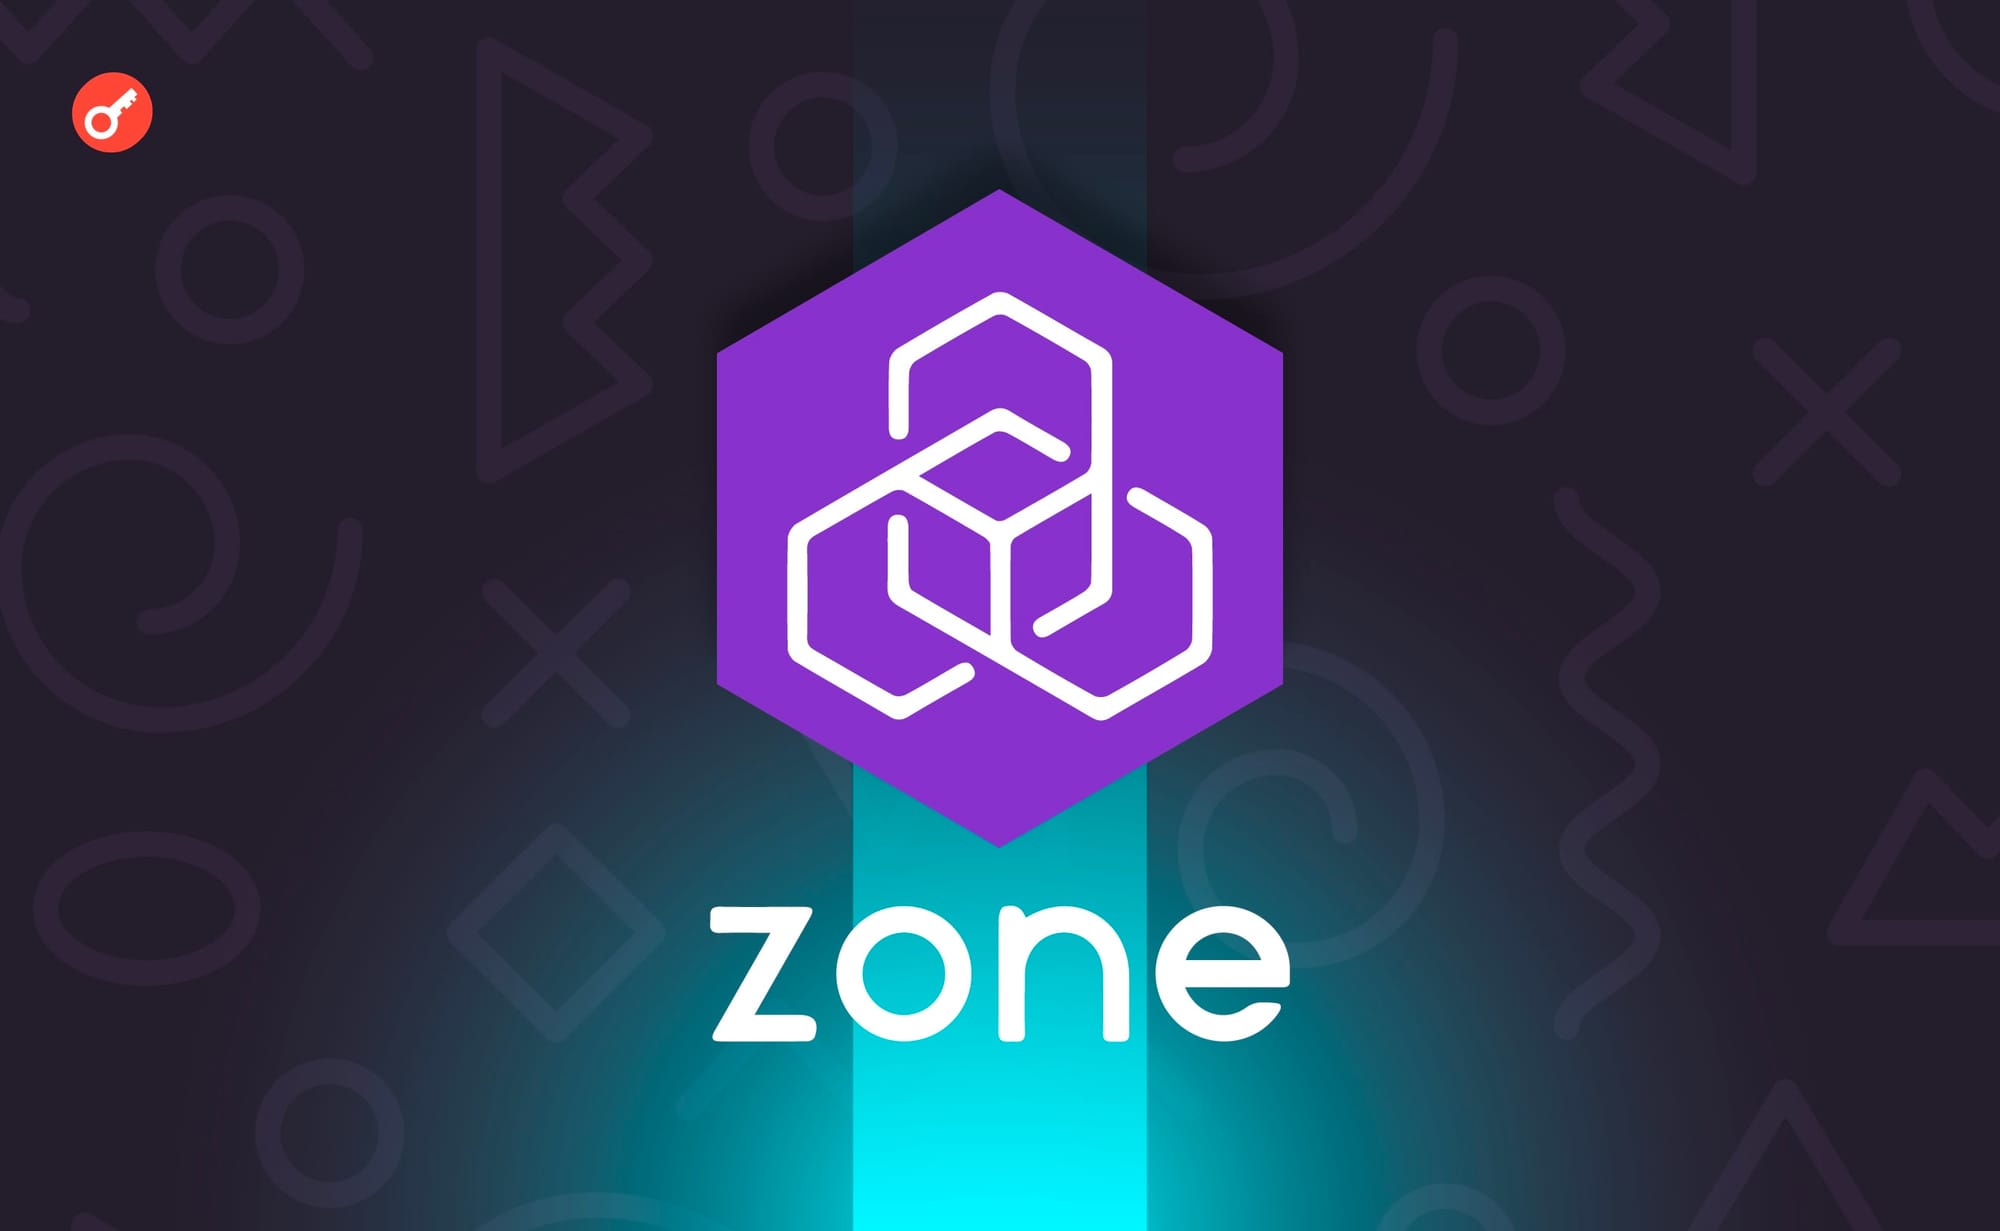 Blockchain startup Zone has attracted $8.5 million in investments